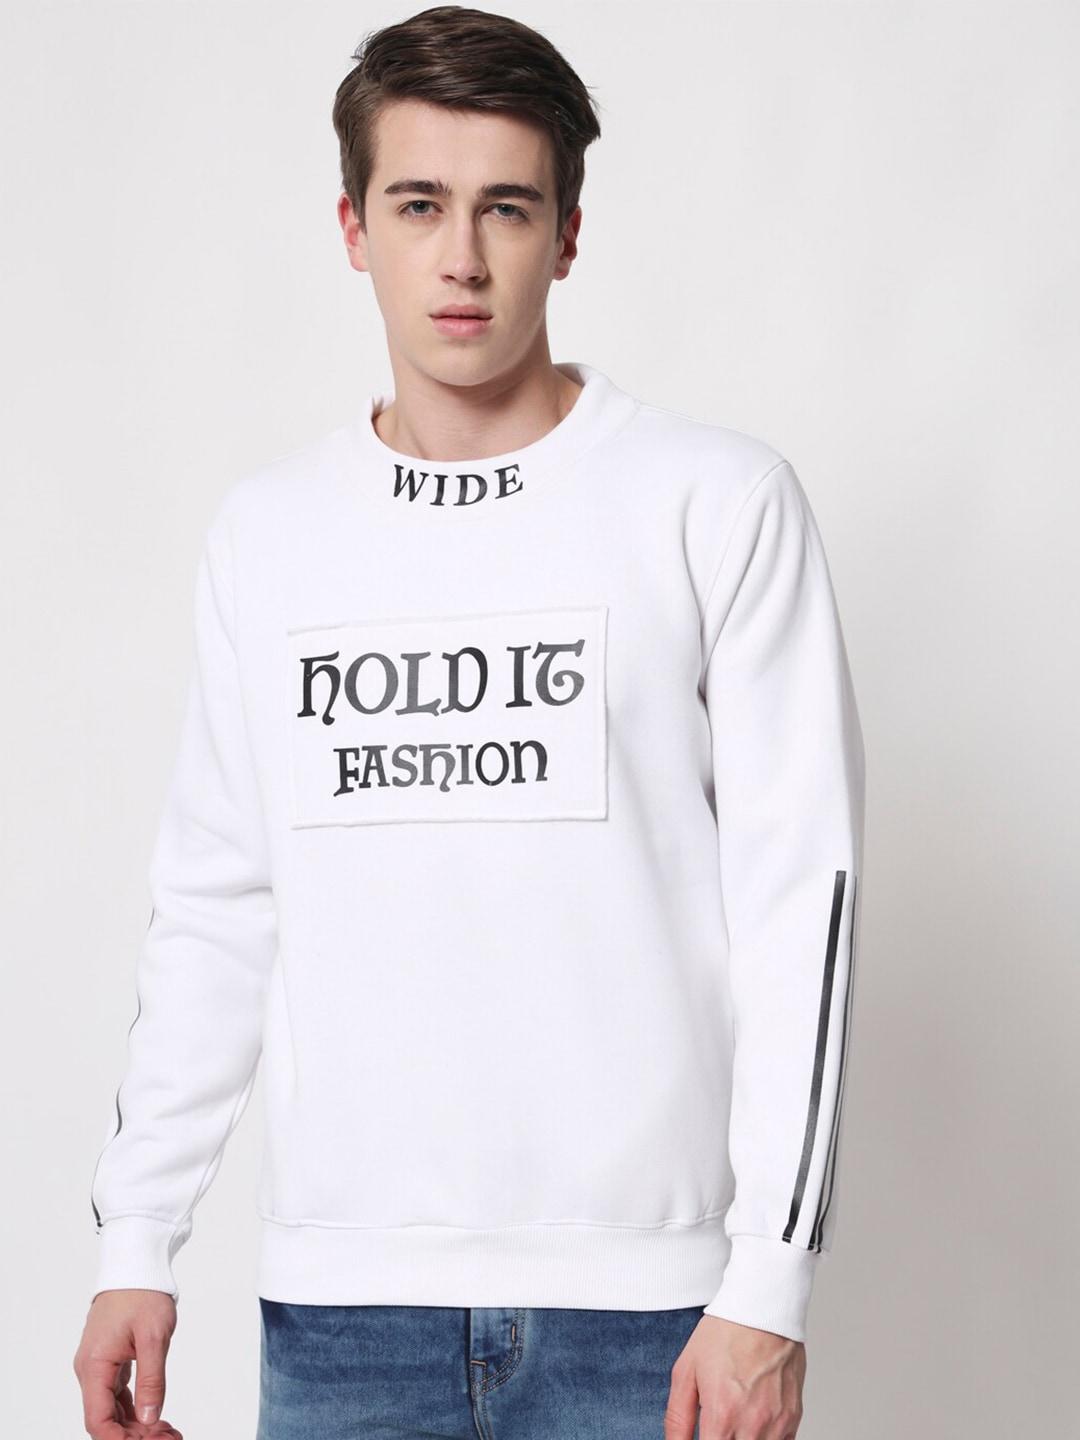 holdit-men-typography-printed-knitted-pullover-sweatshirt